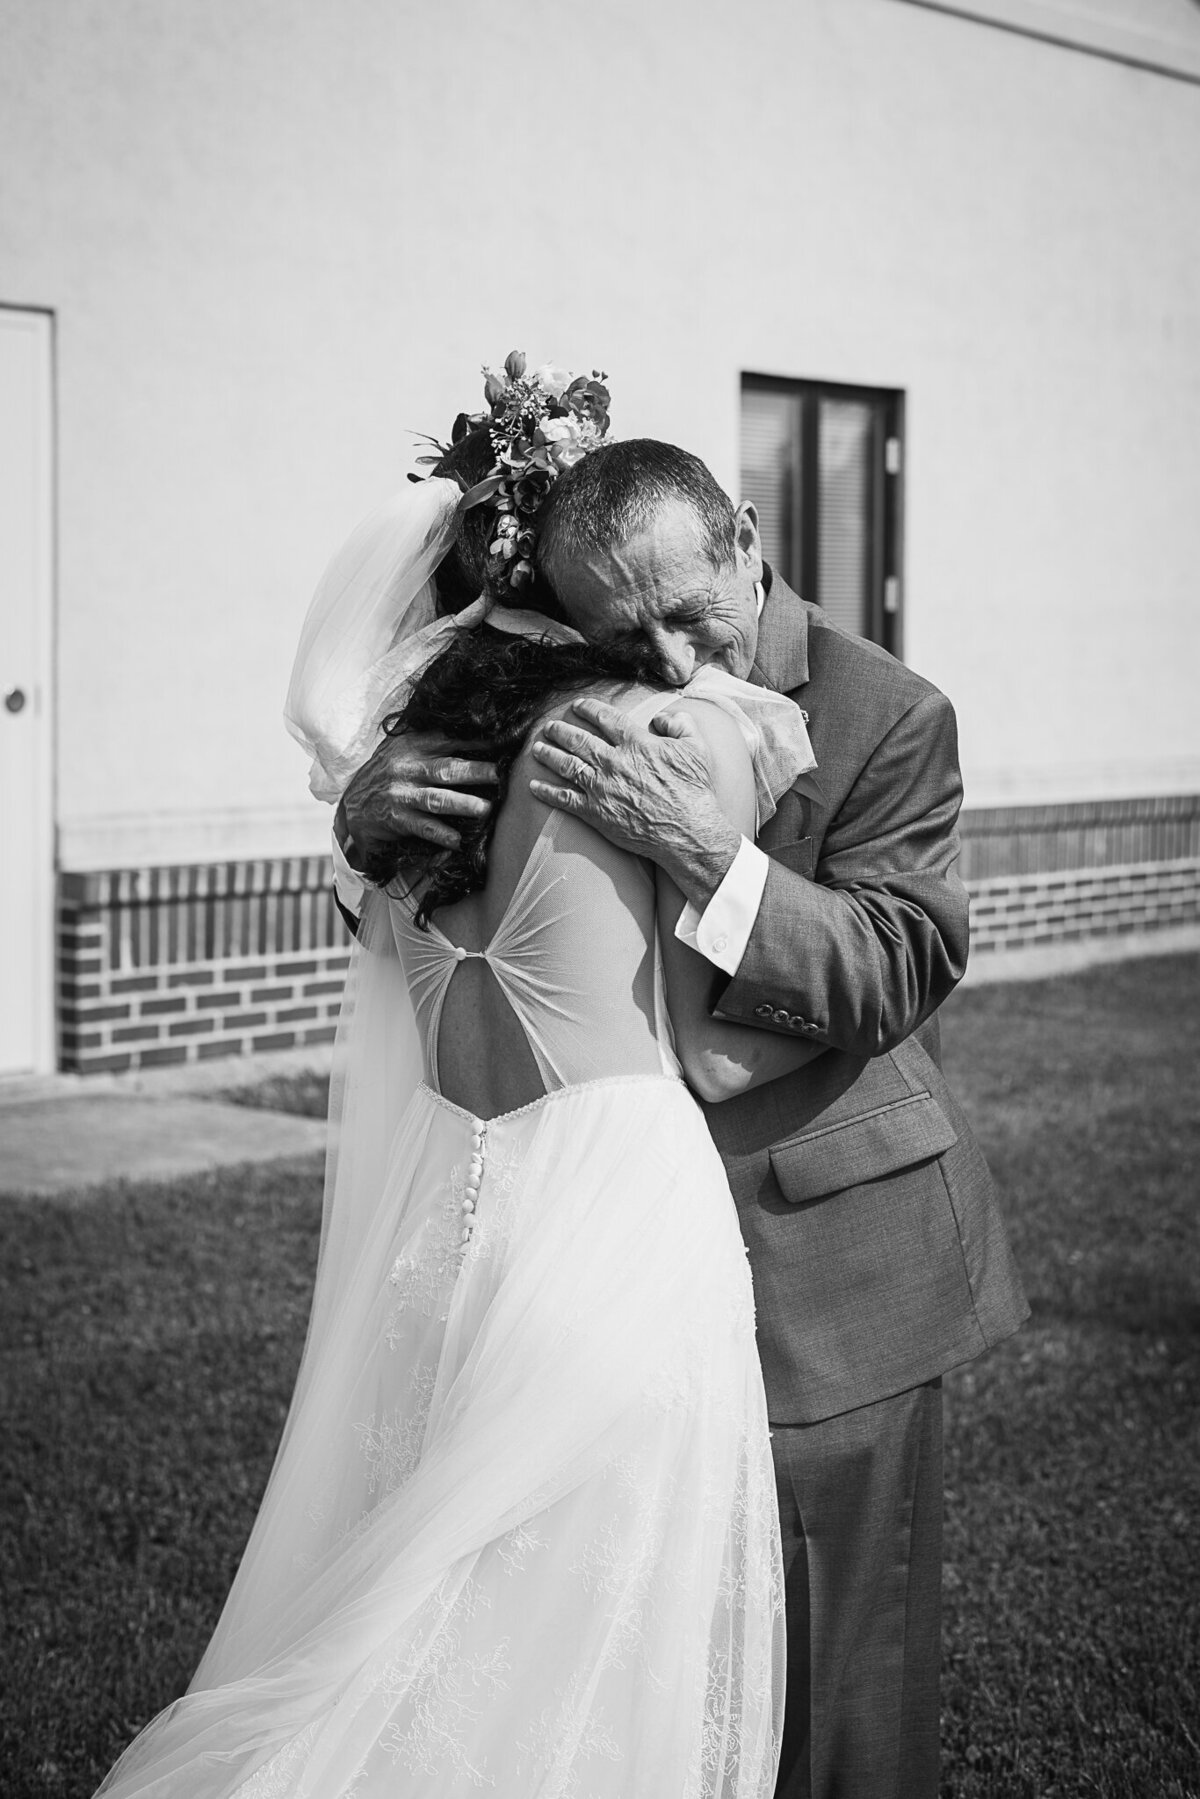 Bride, Ronicia Henderson, emotionally embraces her father during their first look on her wedding day in Xenia, Ohio.